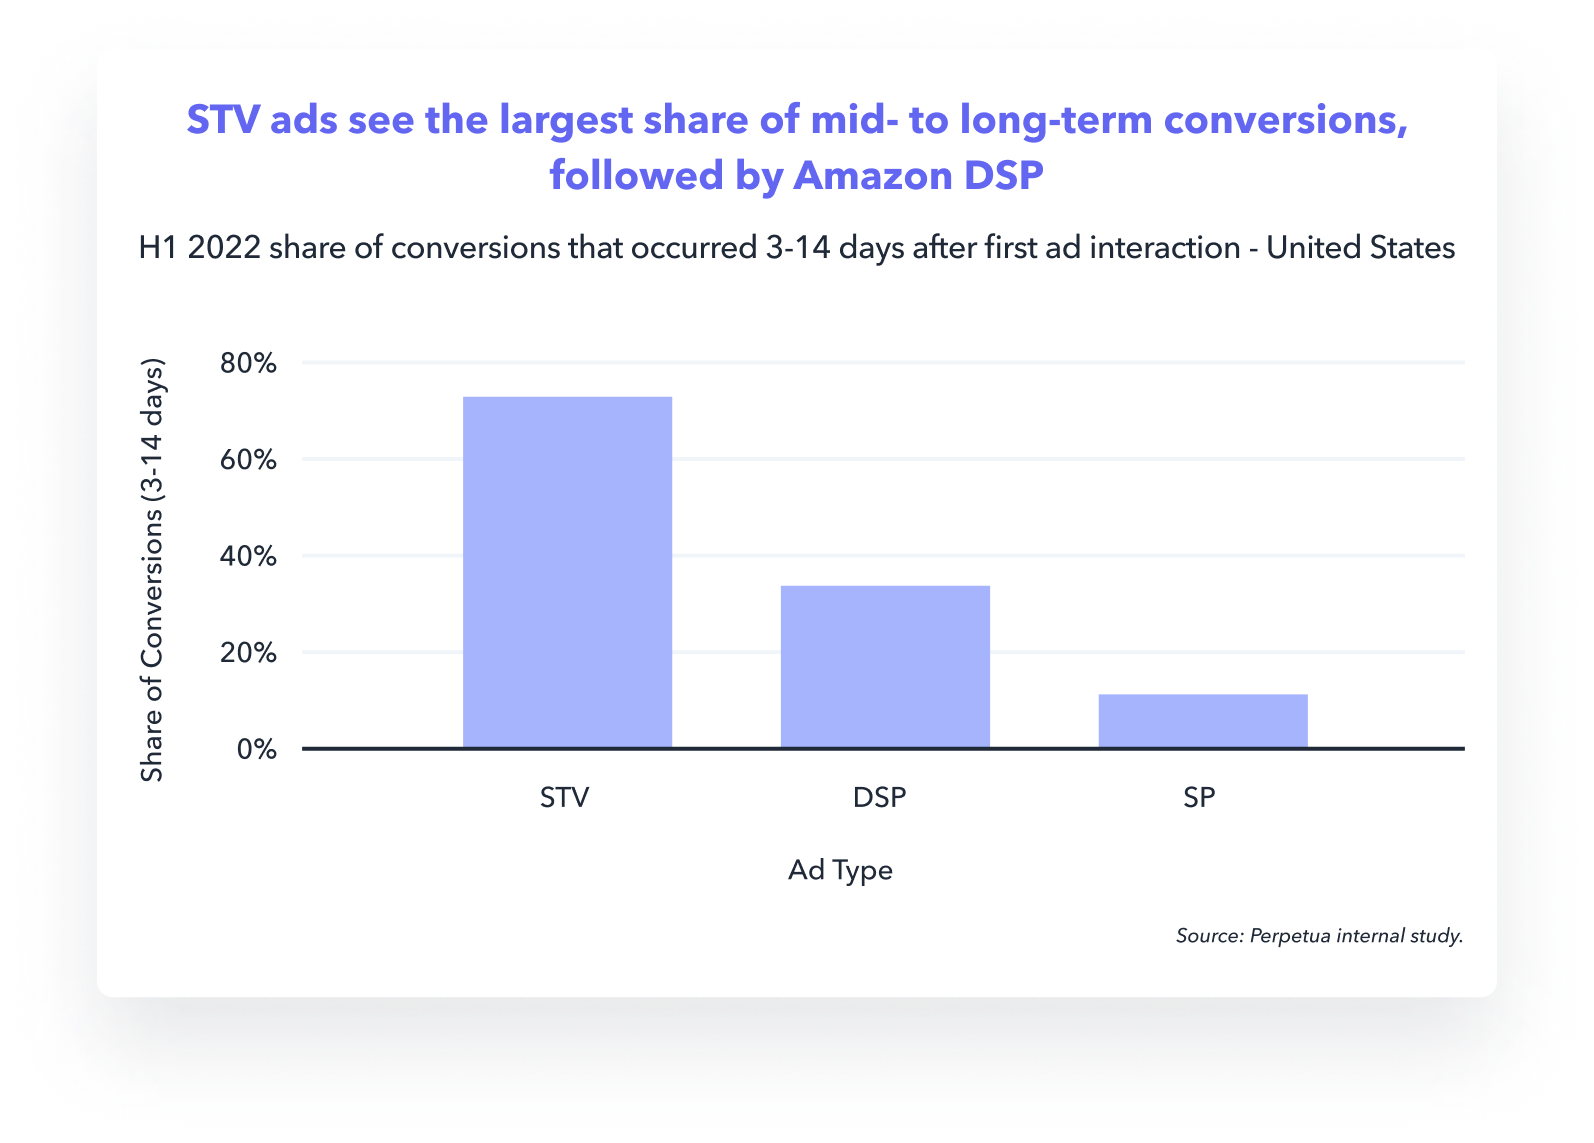 STV ads see the largest share of mid- to long-term conversions, followed by Amazon DSP